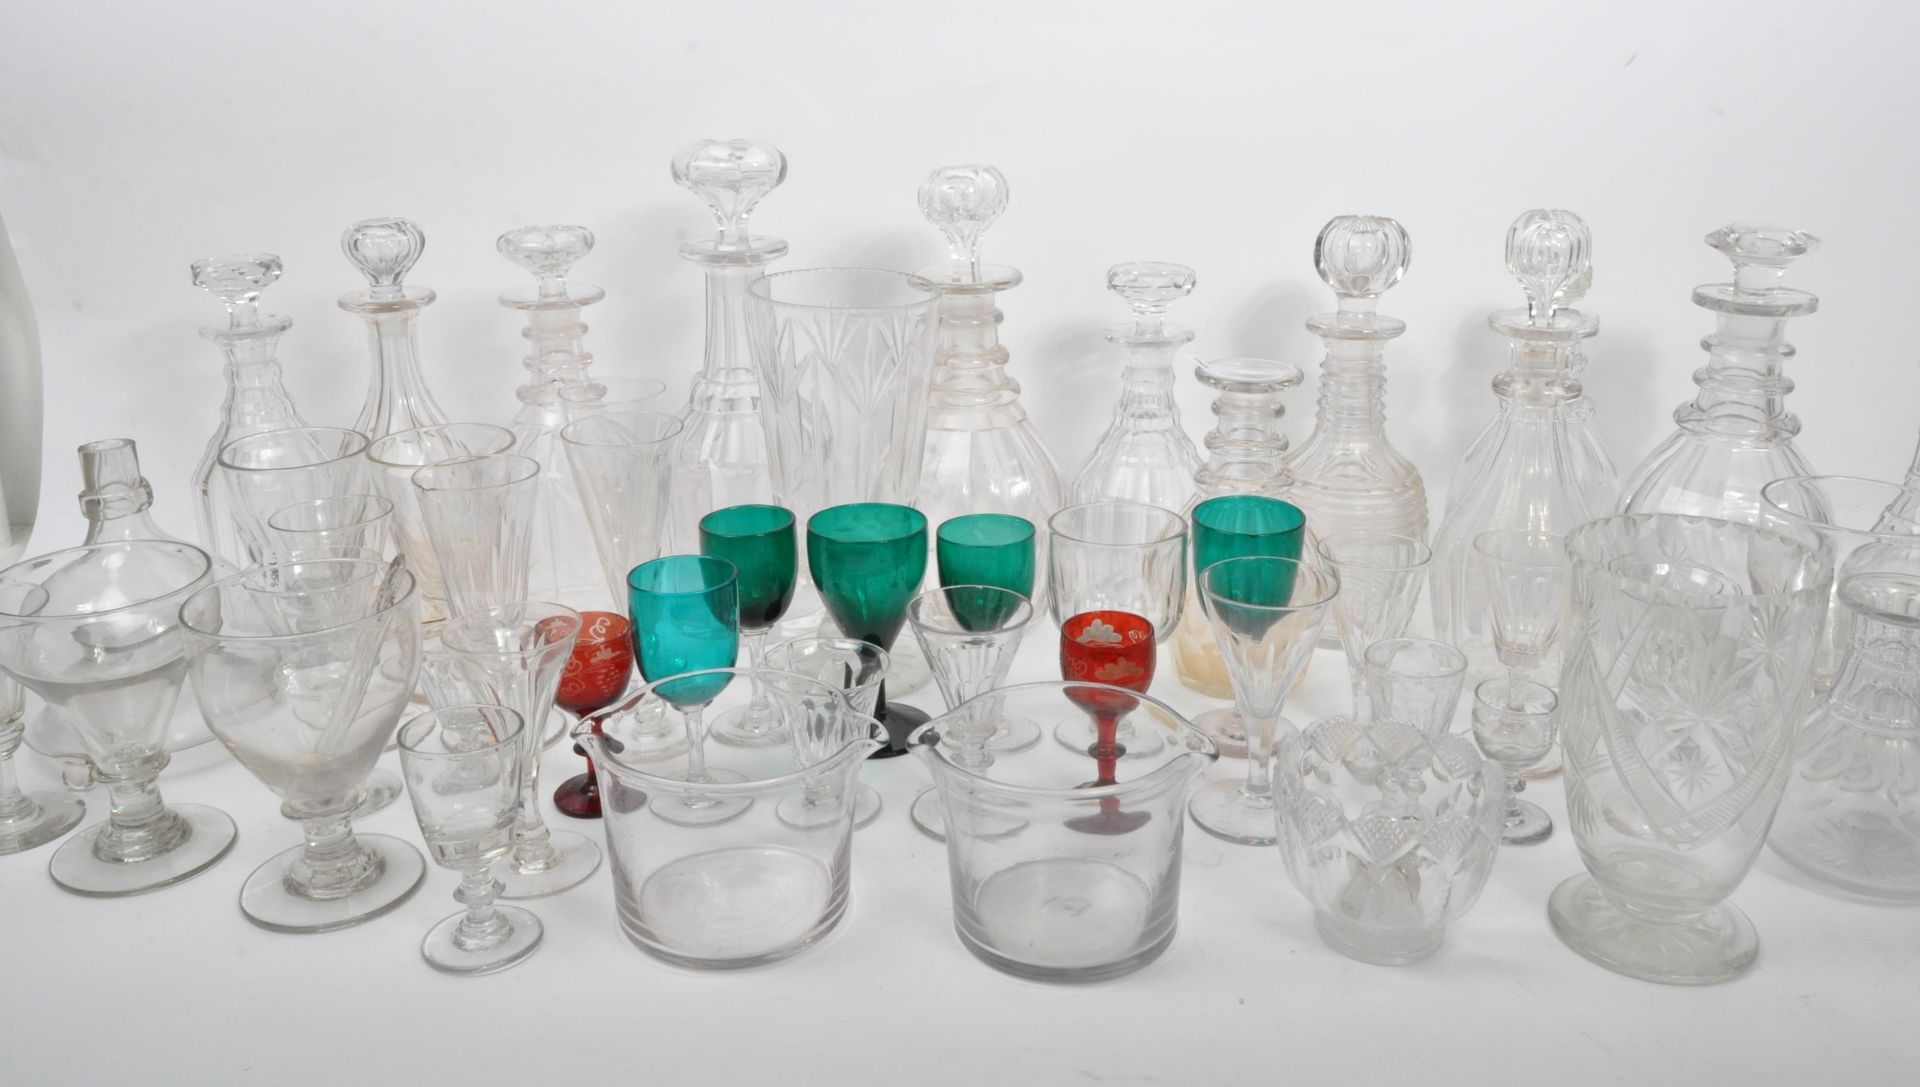 LARGE COLLECTION OF 18TH & 19TH CENTURY CUT GLASS DECANTERS